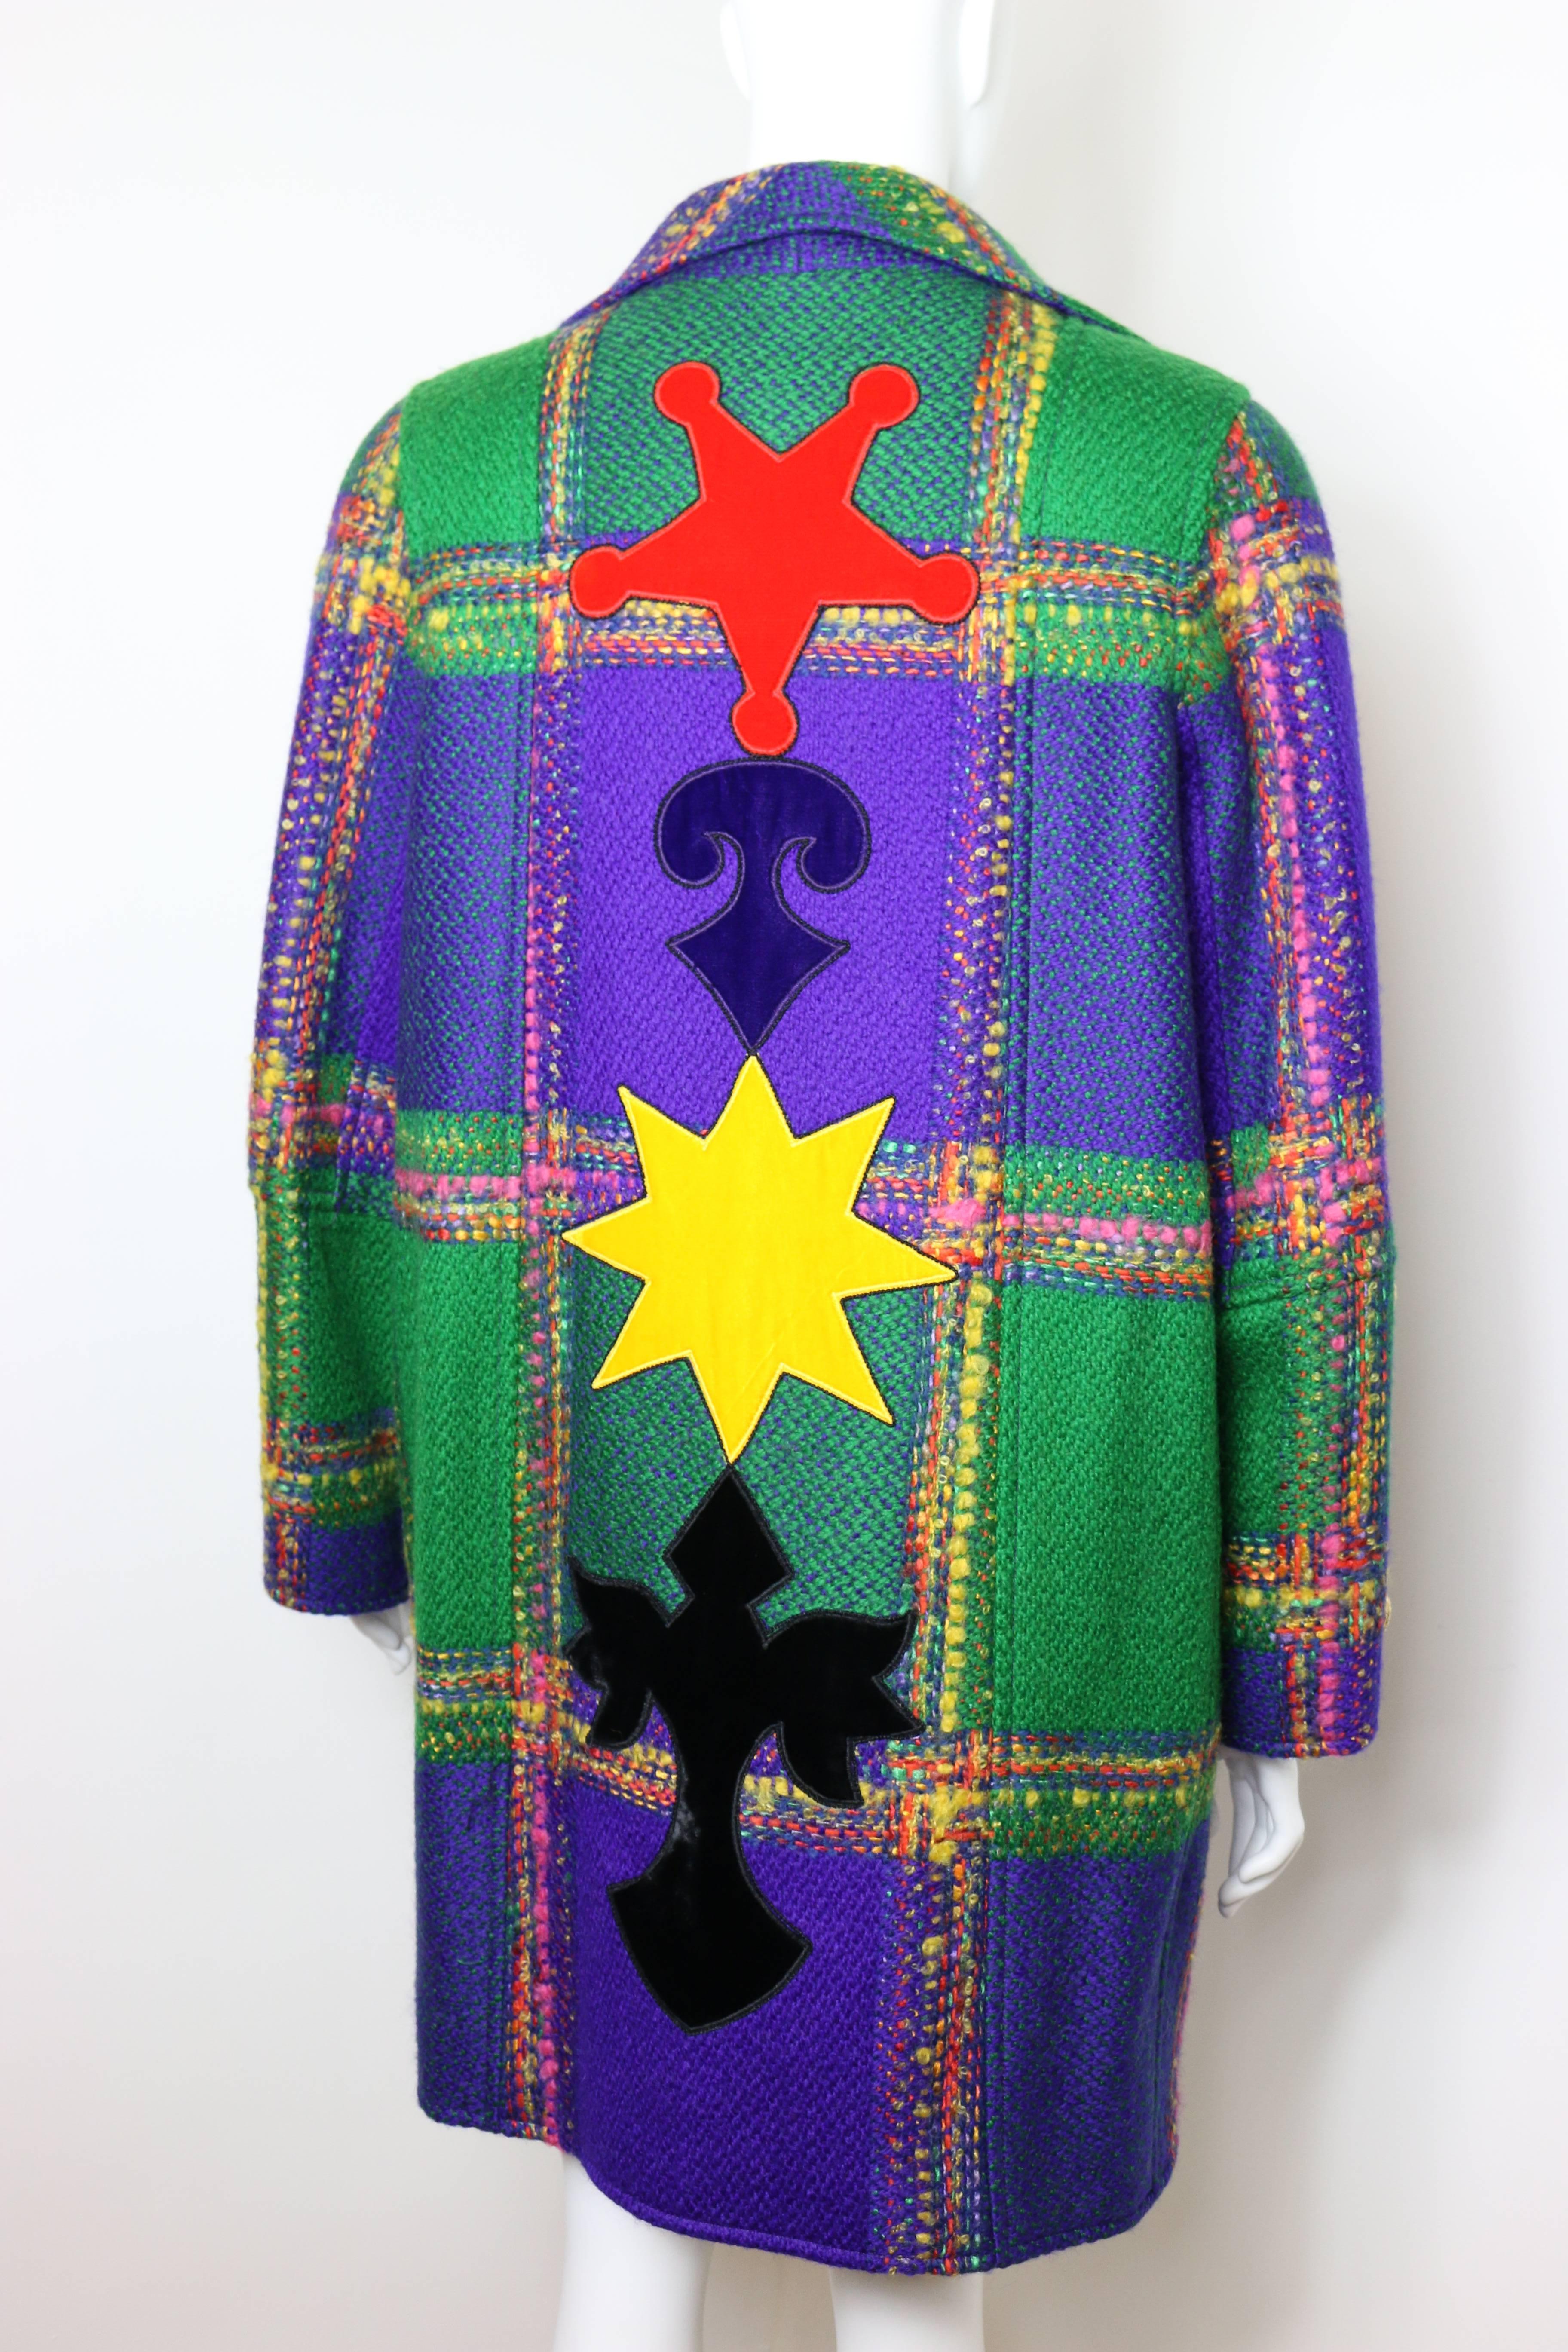 - This beautiful and rare find early 90s Christian Lacroix multi-coloured wool tweed plaid coat is one of a kind!

- This coat is straight cut 80s slightly bigger silhouette.

- Featuring thirteen gold gripoix buttons in front and 

- Colourful